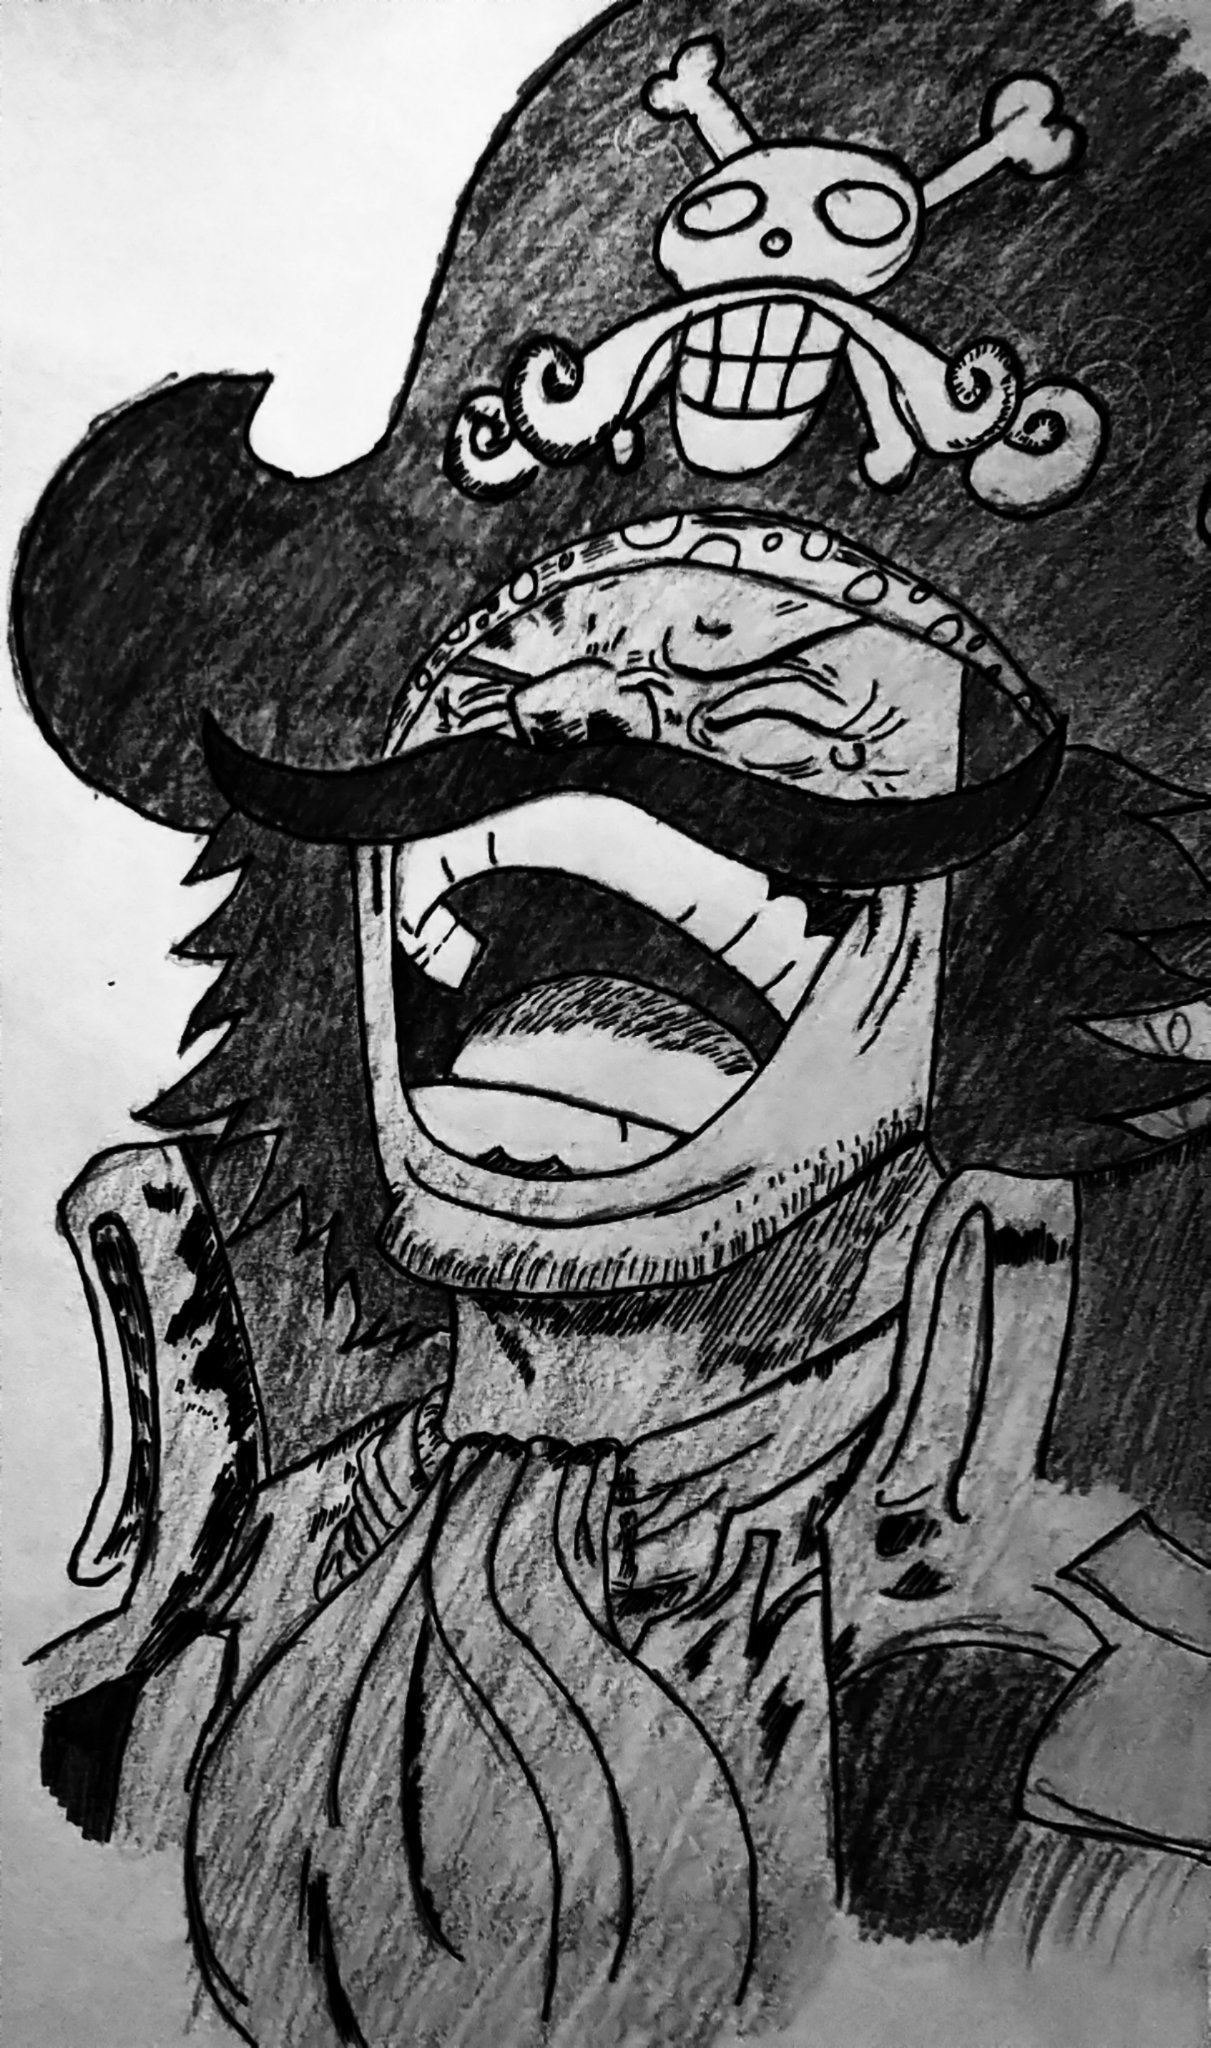 Wamiq Drew The Pirate King Gol D Roger At Laugh Tale From One Piece Chapter 967 T Co Xzulewzcsr Twitter